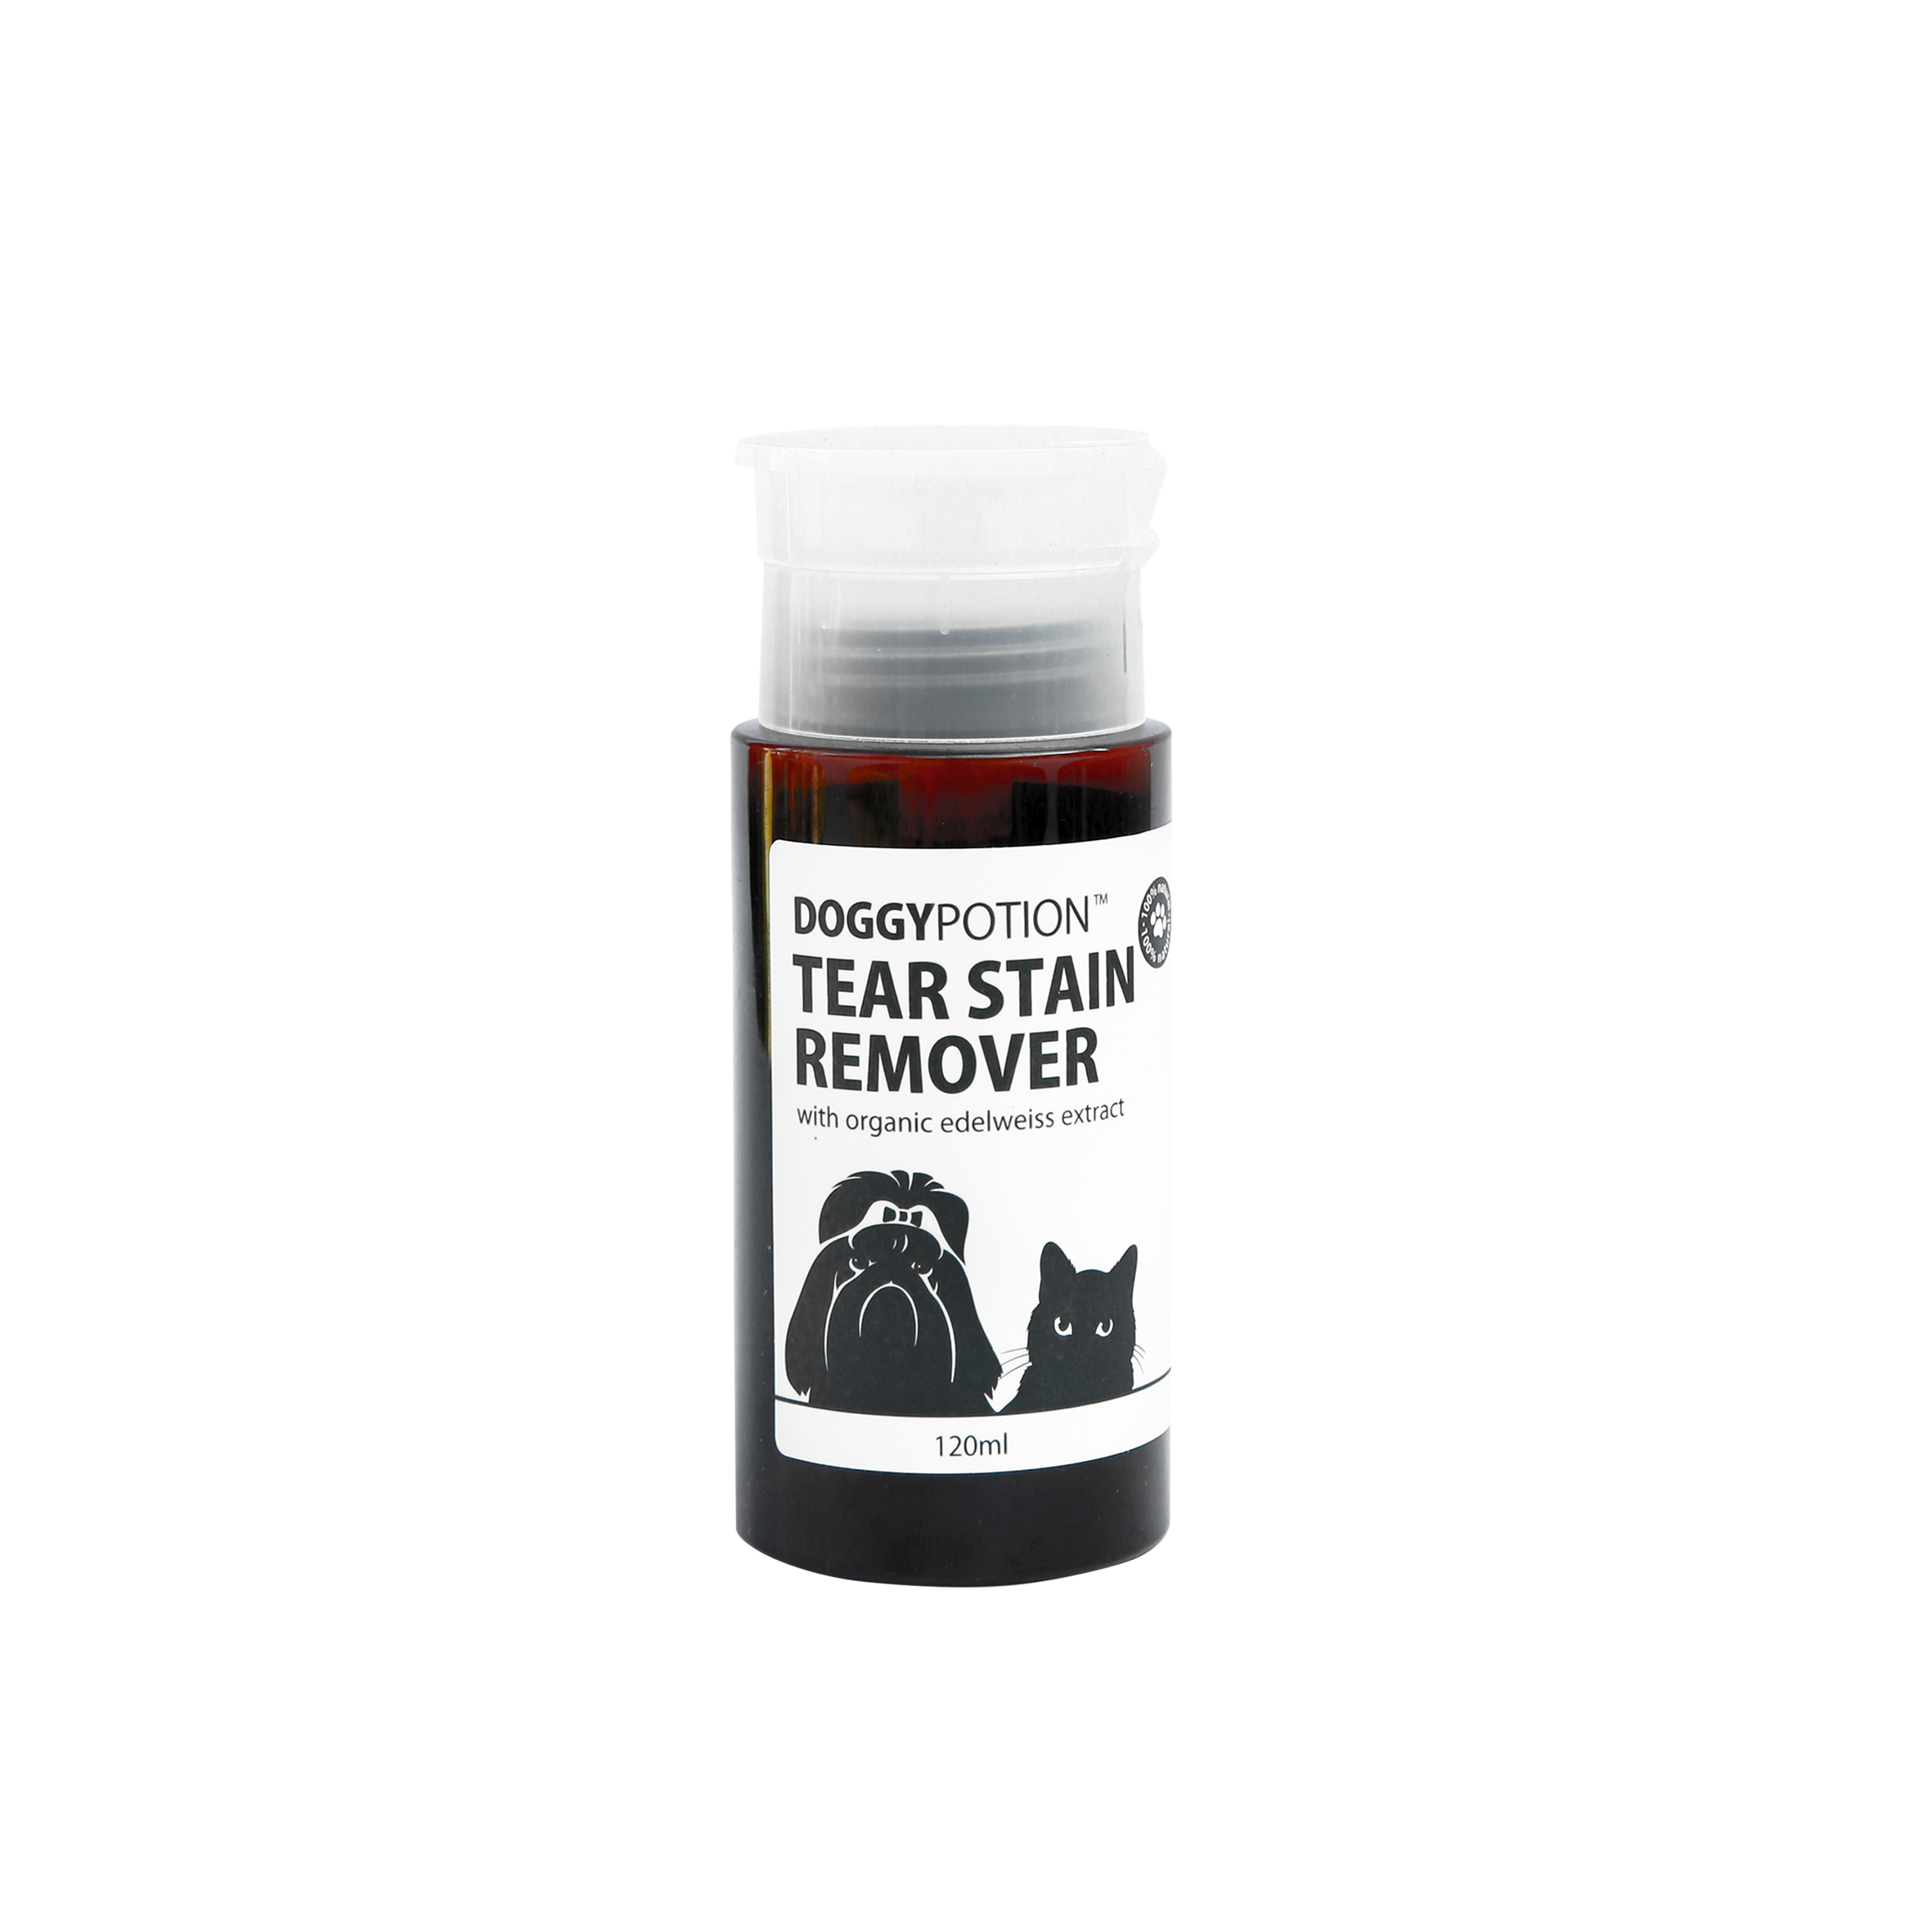 Doggy Potion Tear stain remover